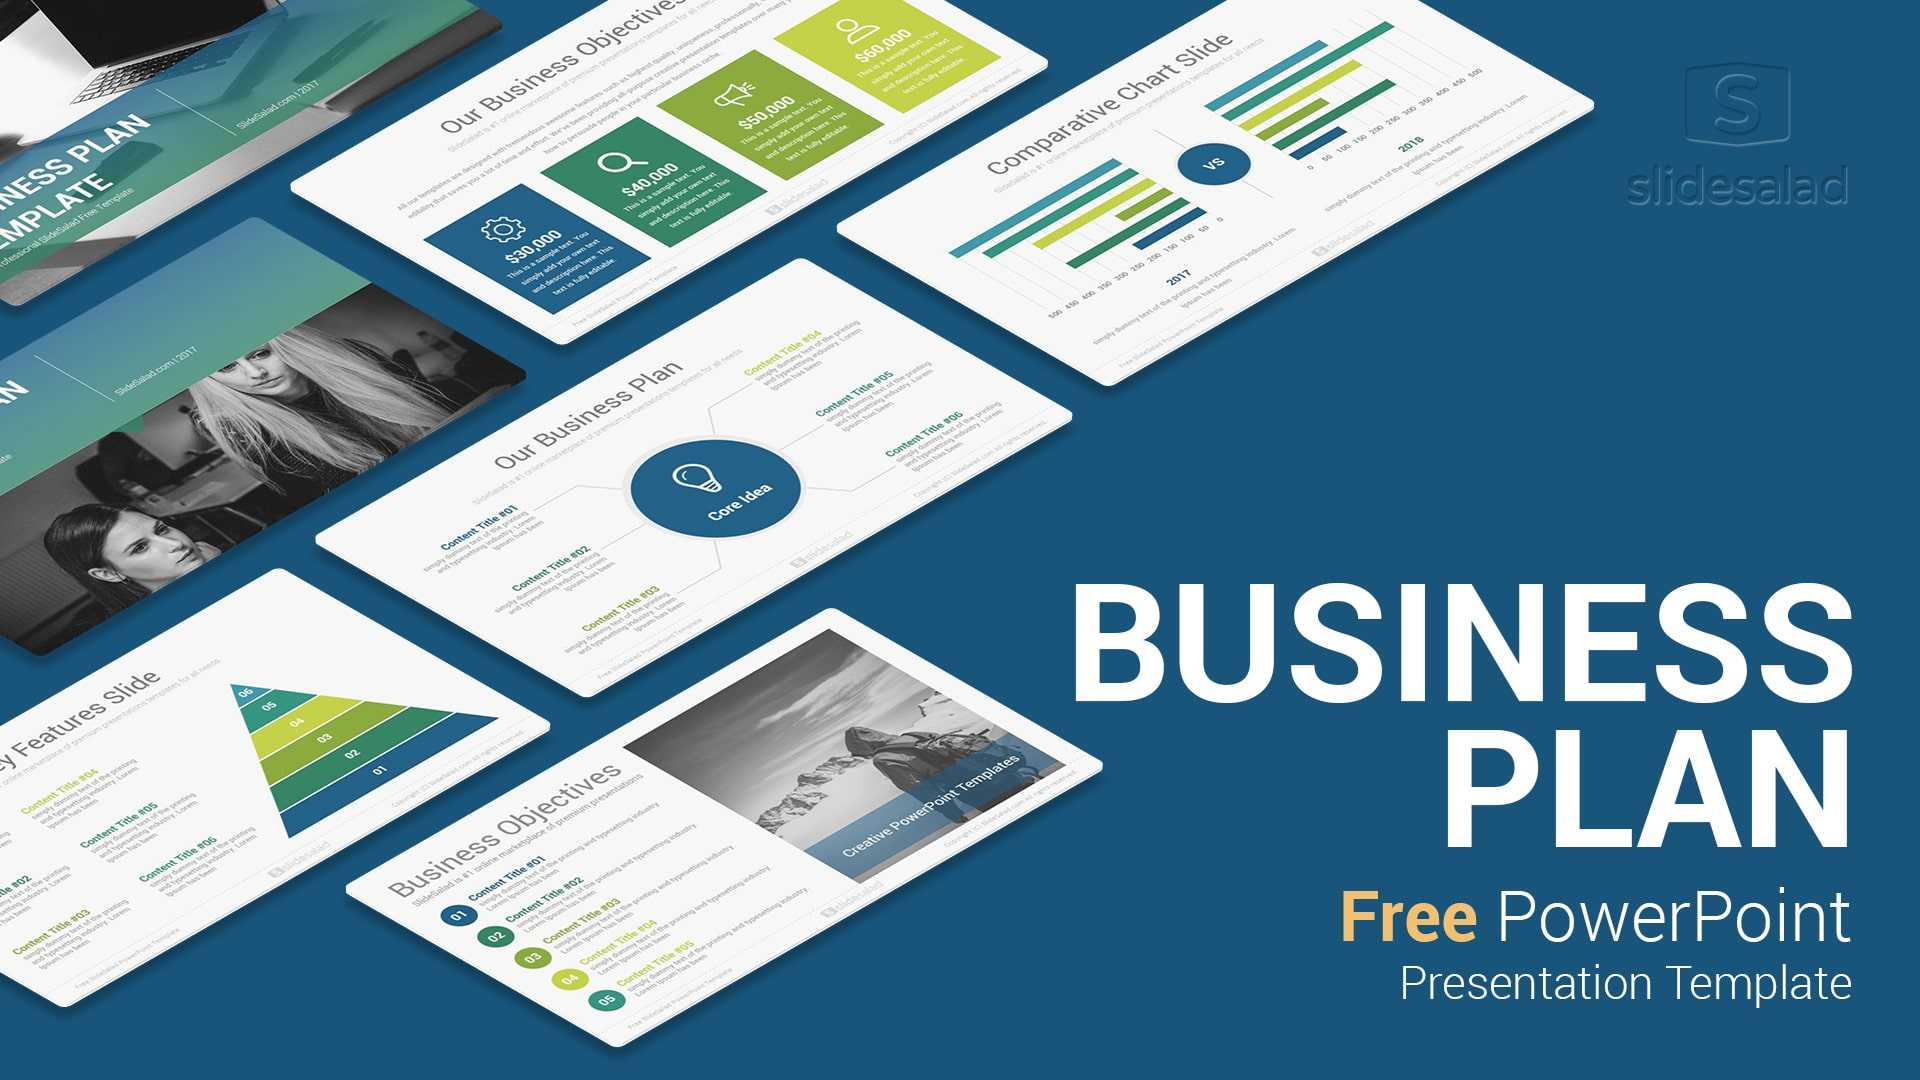 Business Plan Free Powerpoint Presentation Template – Slidesalad Within Business Card Template Powerpoint Free